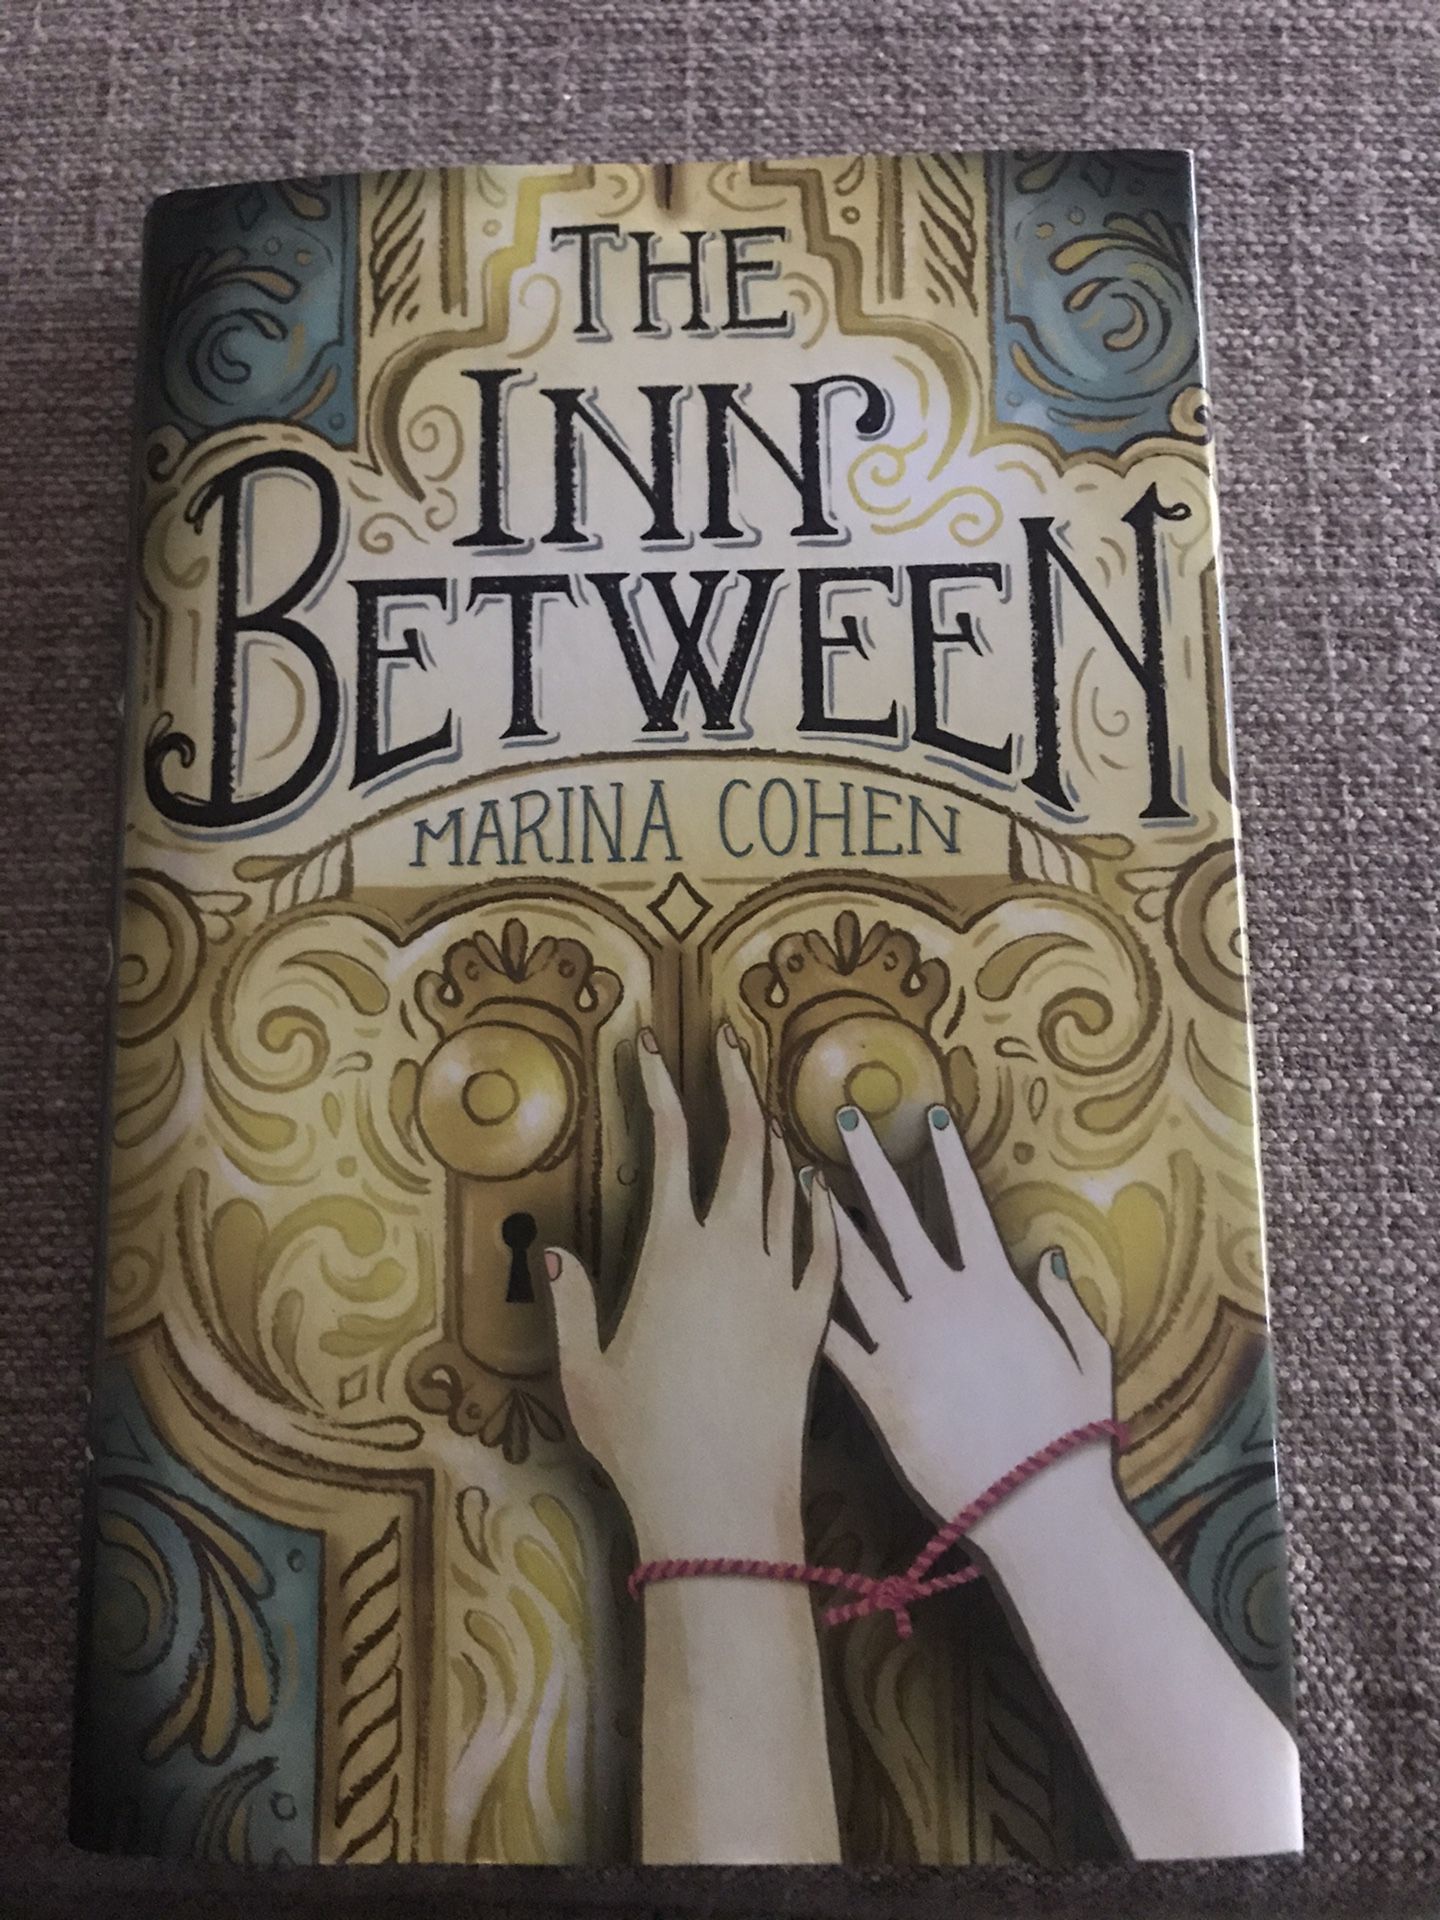 The Inn Between book by Marina Cohen - great read for children